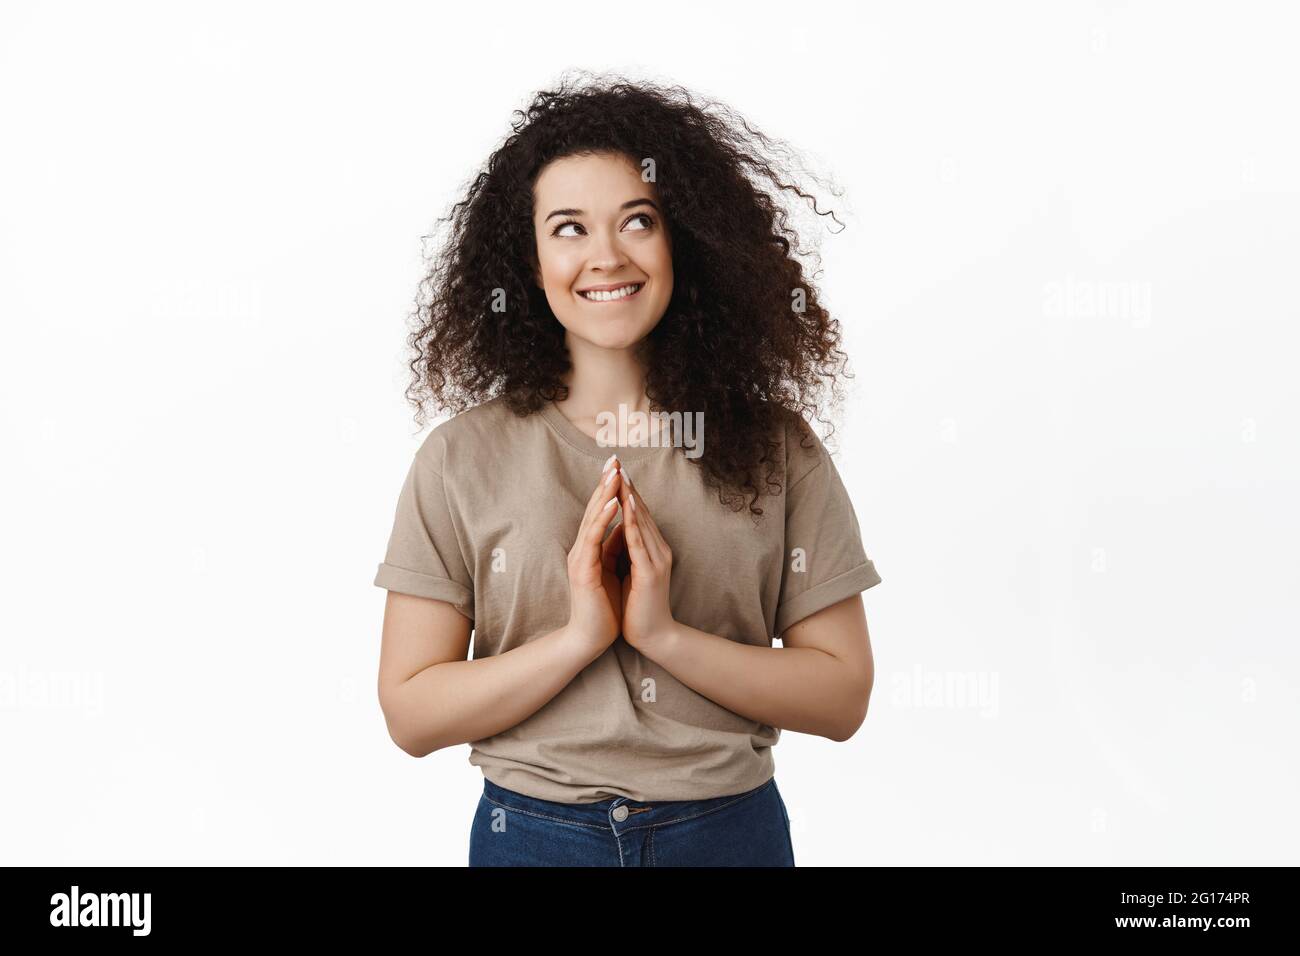 Coy brunette girl scheming, having evil genius idea, steeple fingers and looking devious at upper right corner, smiling thoughtful, standing against Stock Photo